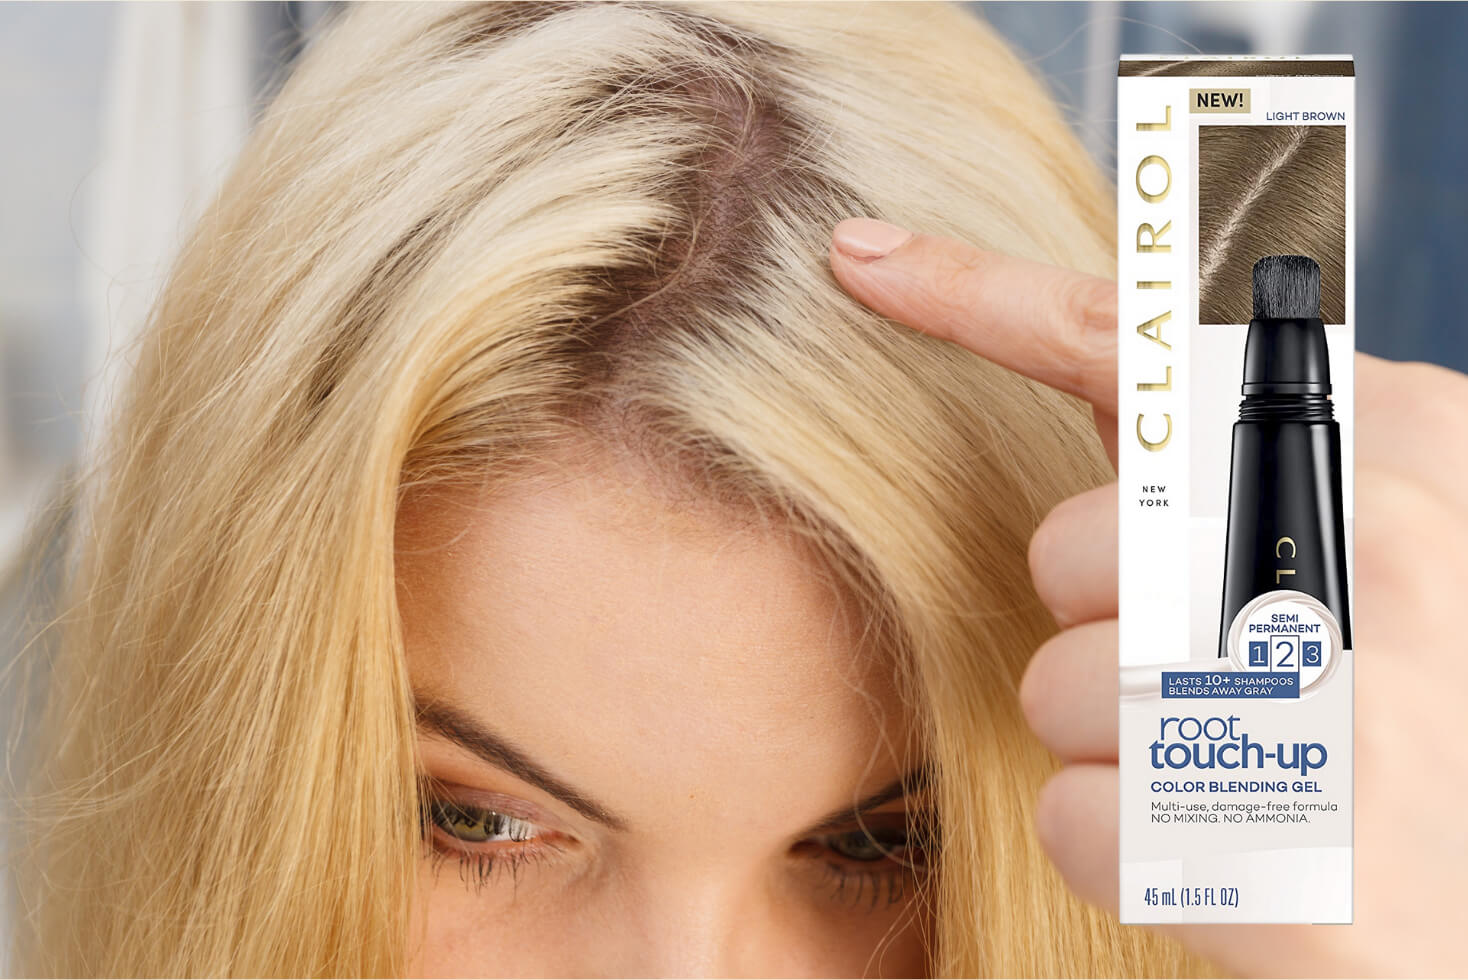 The Clairol Root Touch Up Color Blending Gel Review